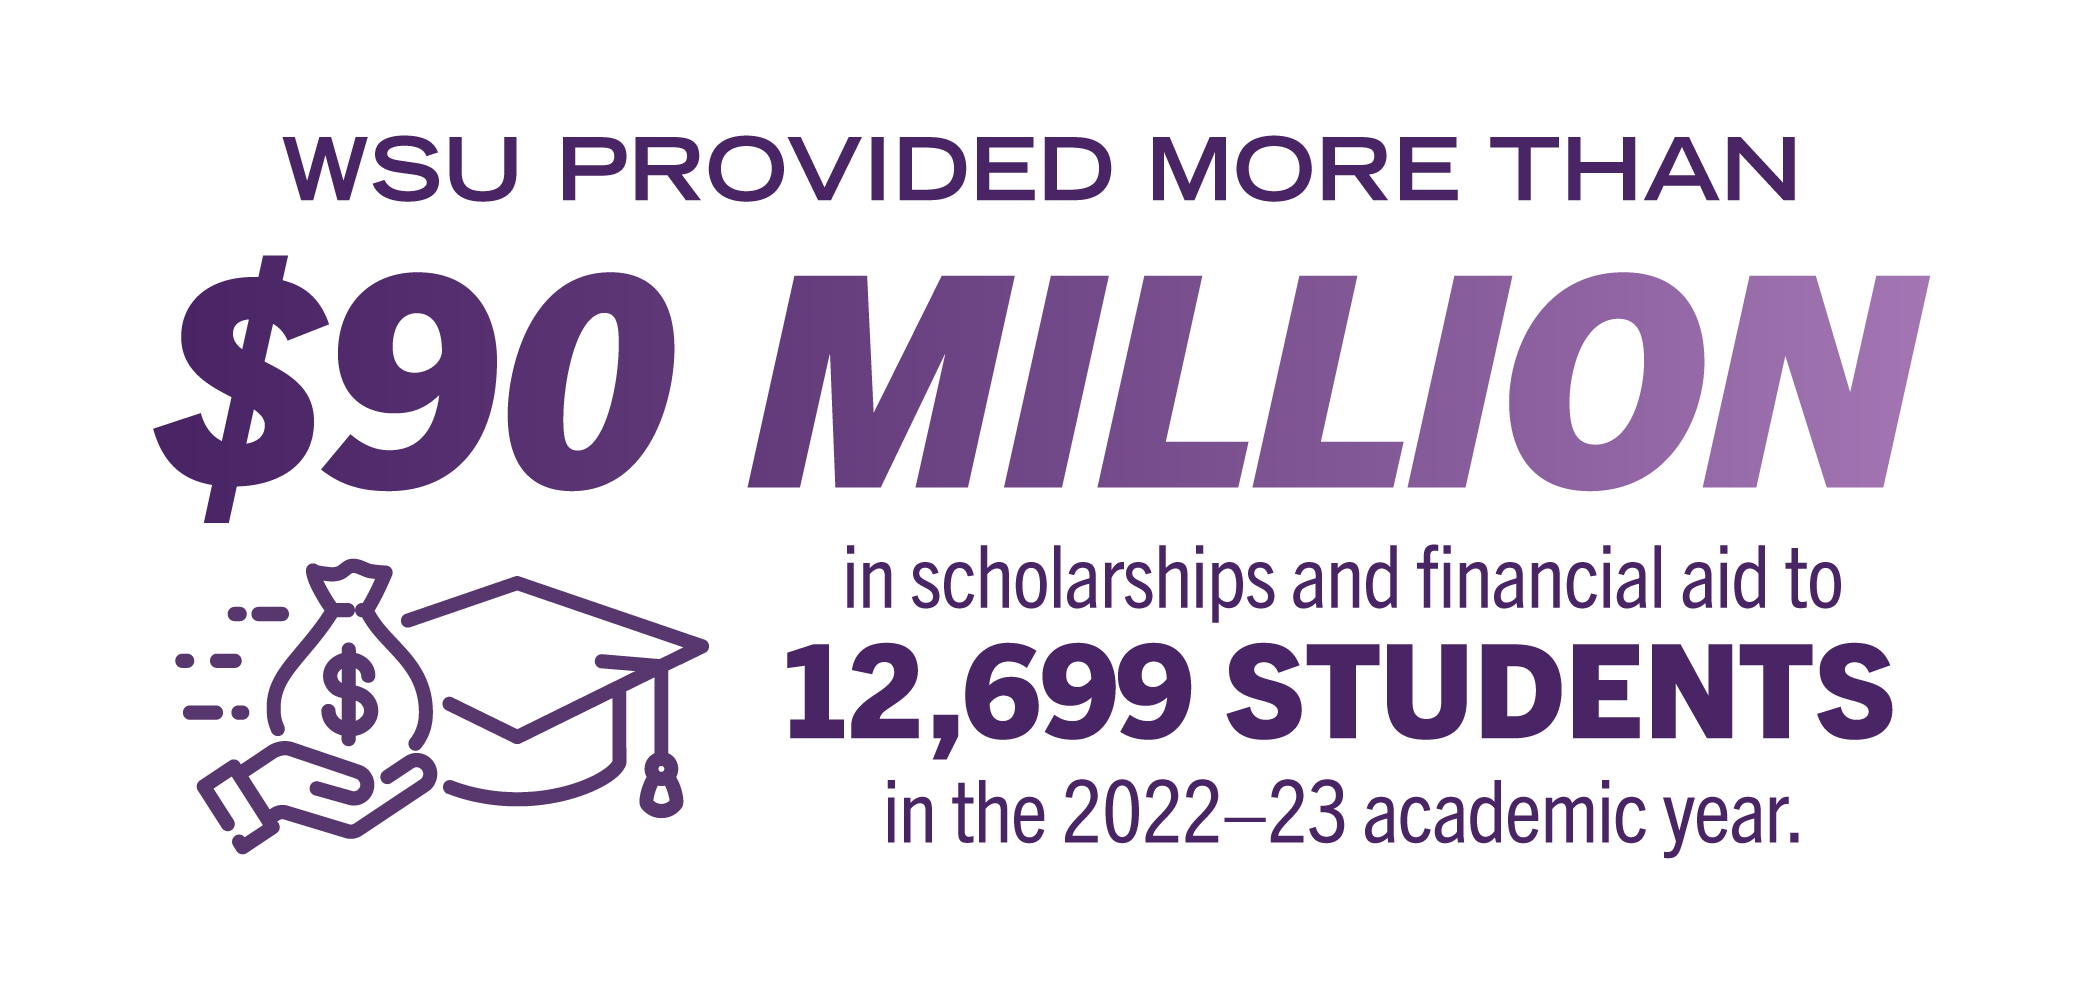 WSU provided more than $90 million in scholarships and financial aid to 12,699 students 2022-23.